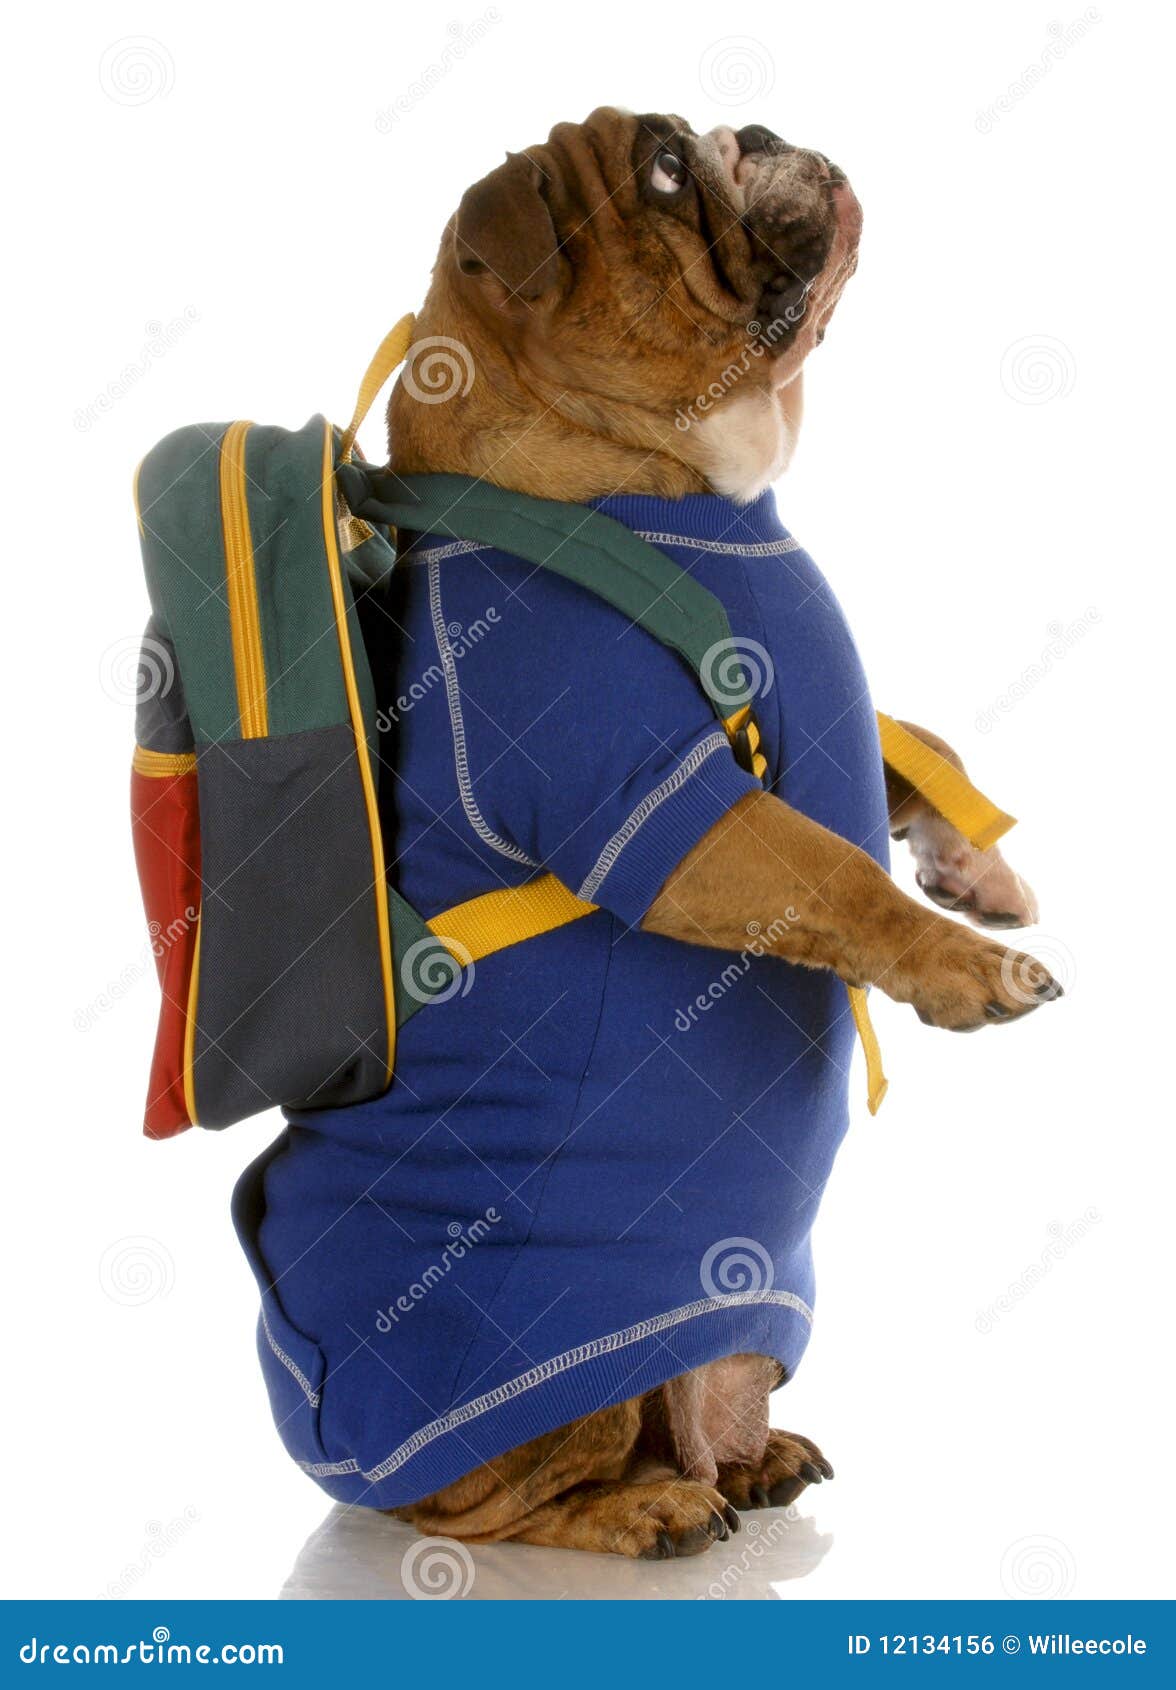 English bulldog standing up wearing blue sweater and backpack.